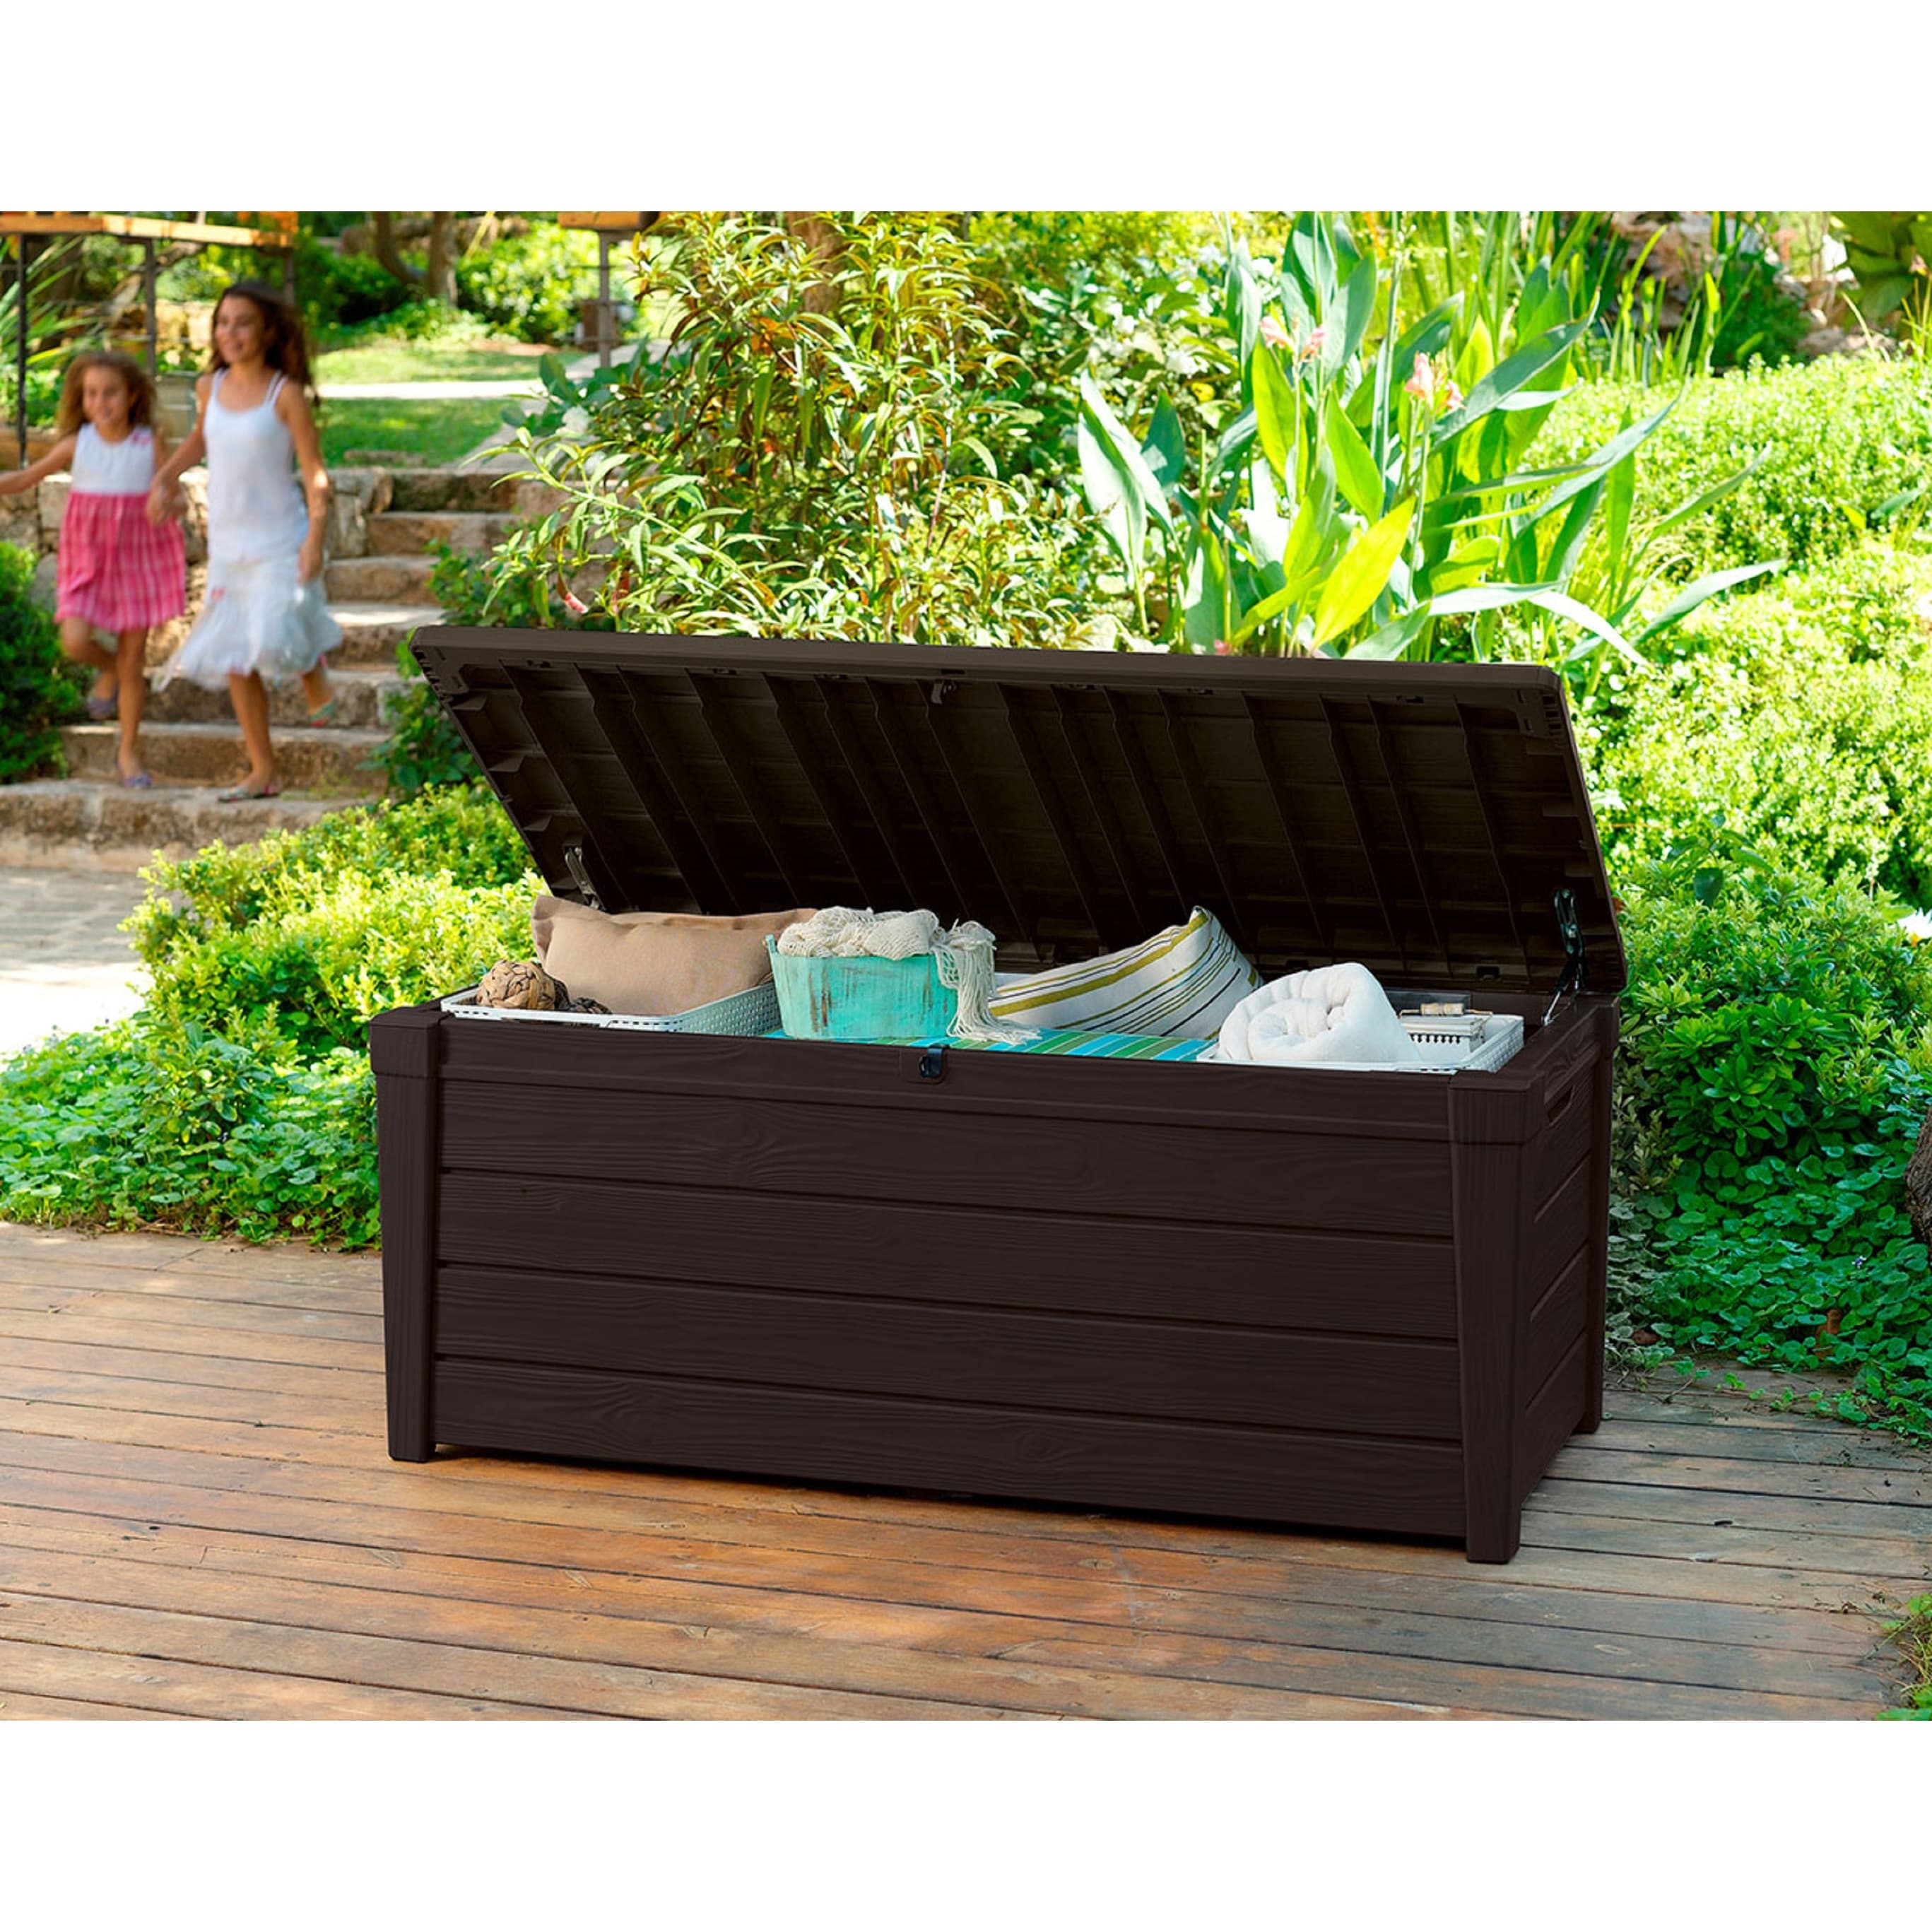 https://ak1.ostkcdn.com/images/products/is/images/direct/9fb130b81ed179bc187991b95a9cc7f95a8ffab3/Keter-Brightwood-120-Gallon-Outdoor-Plastic-Storage-Deck-Box--Brown.jpg